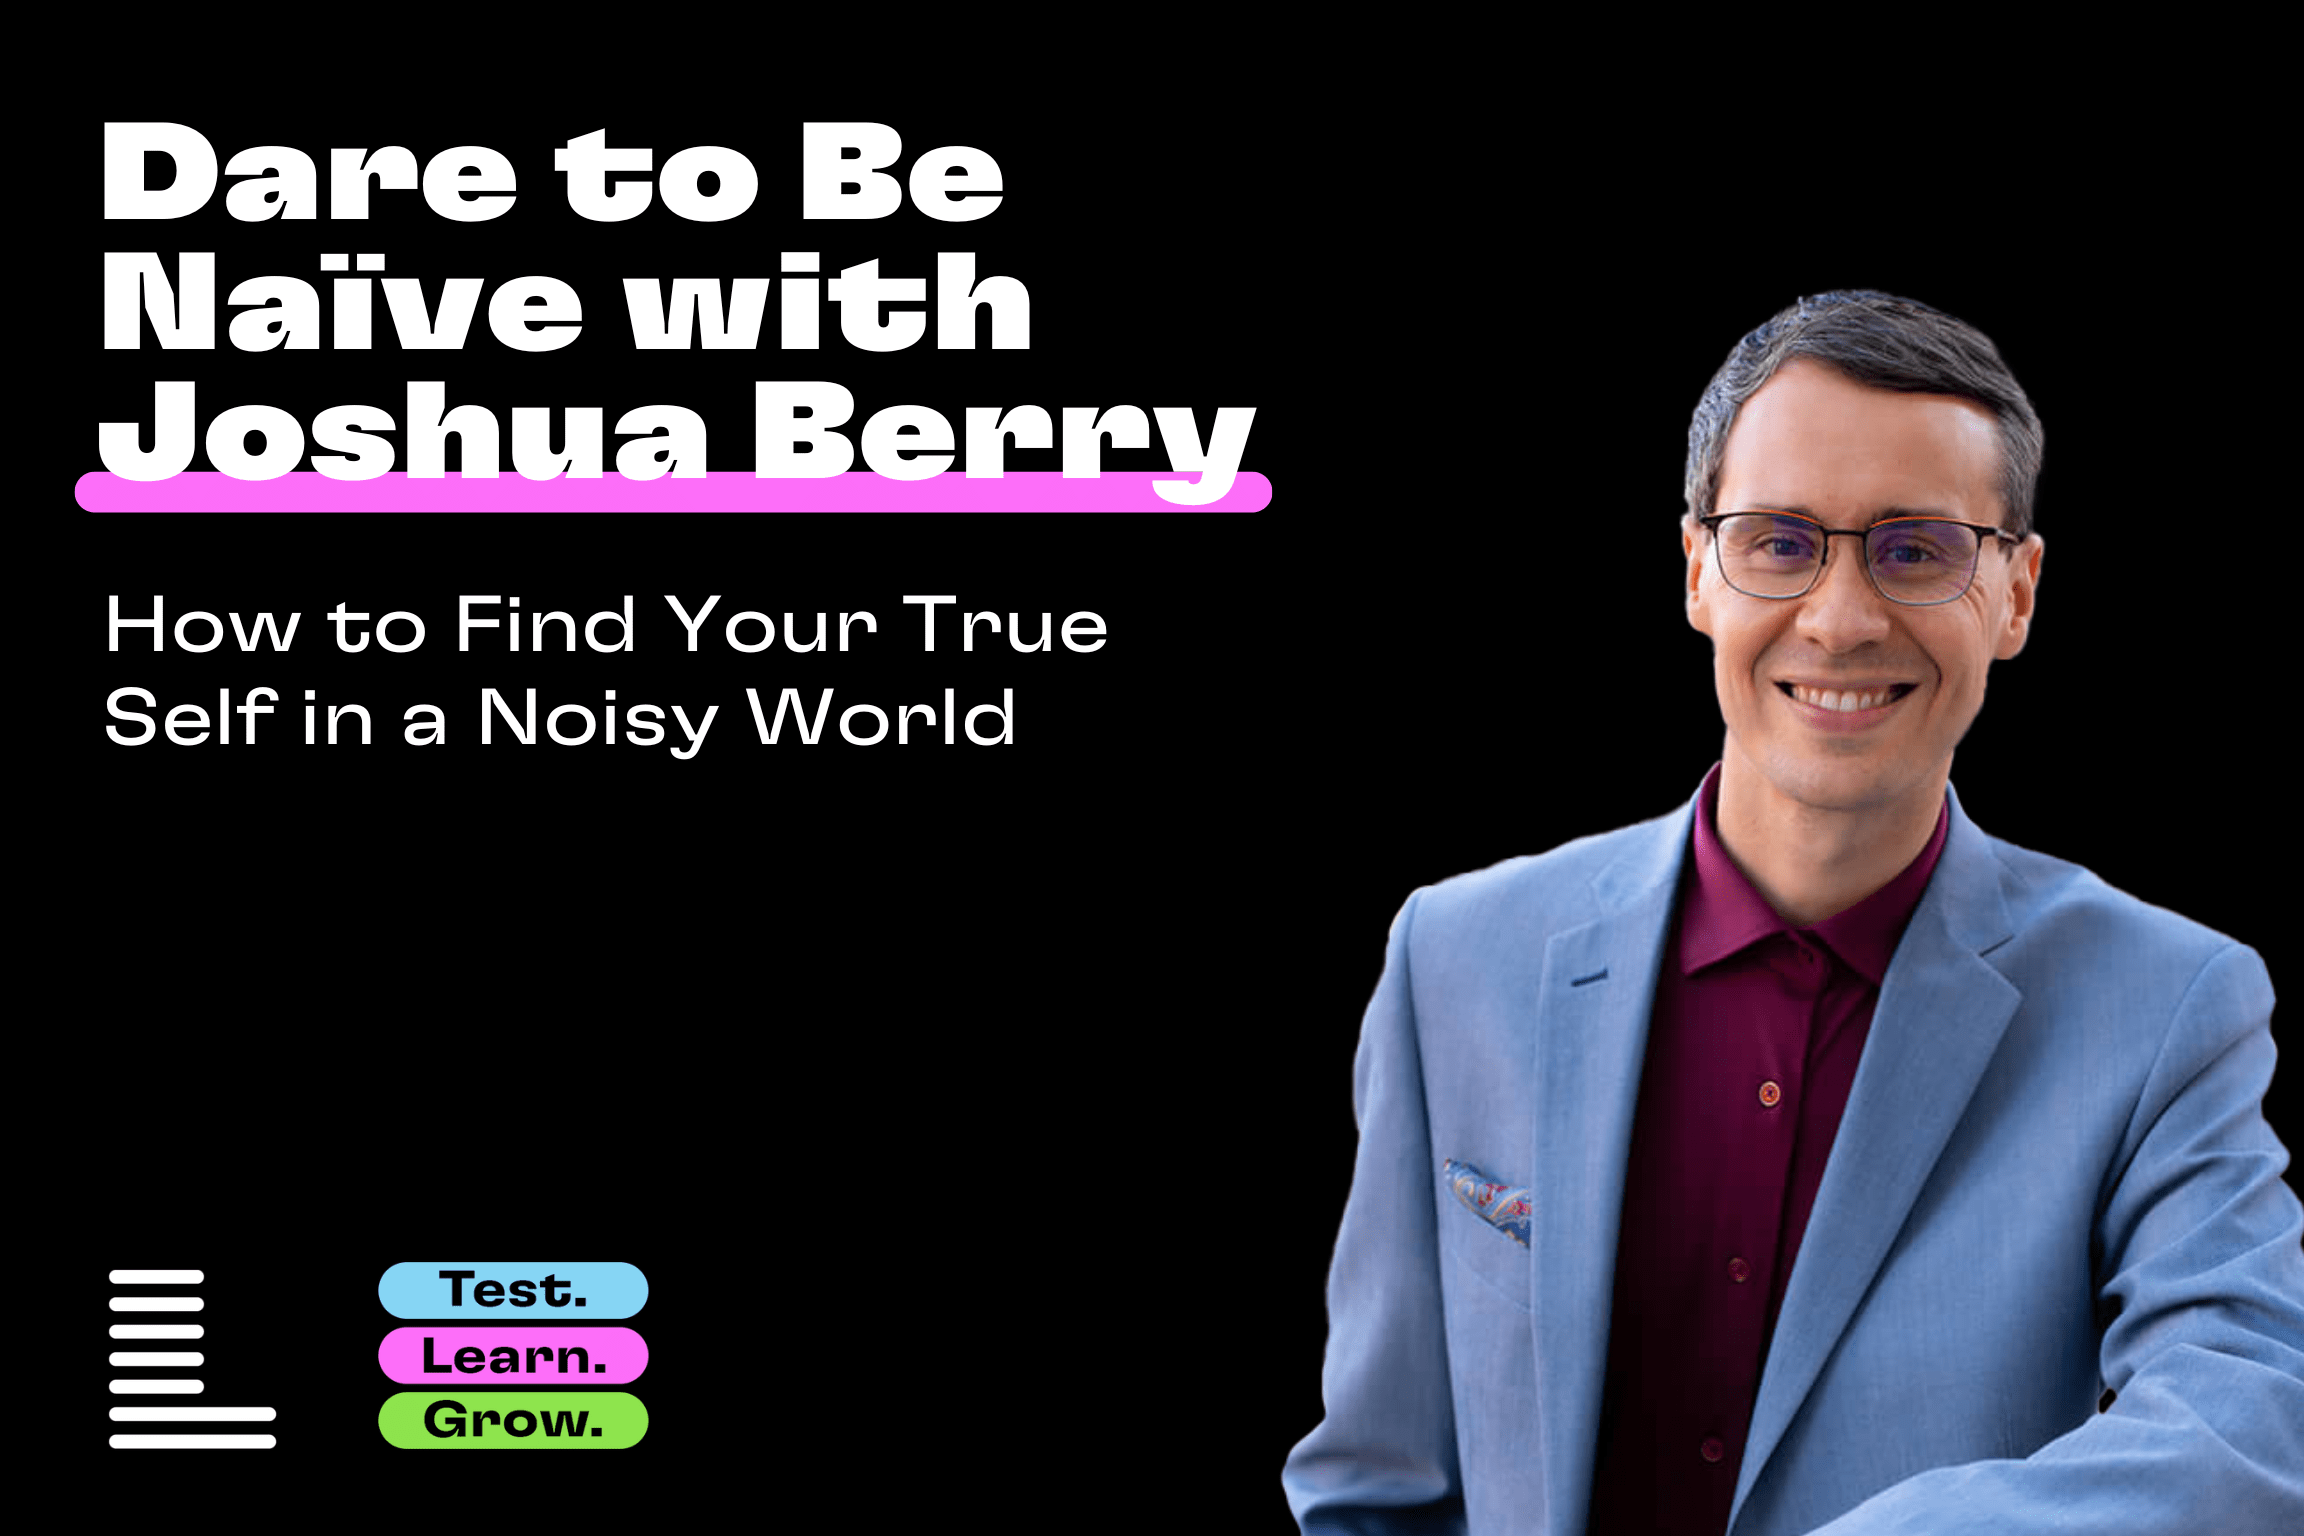 Dare to Be Naive with Joshua Berry